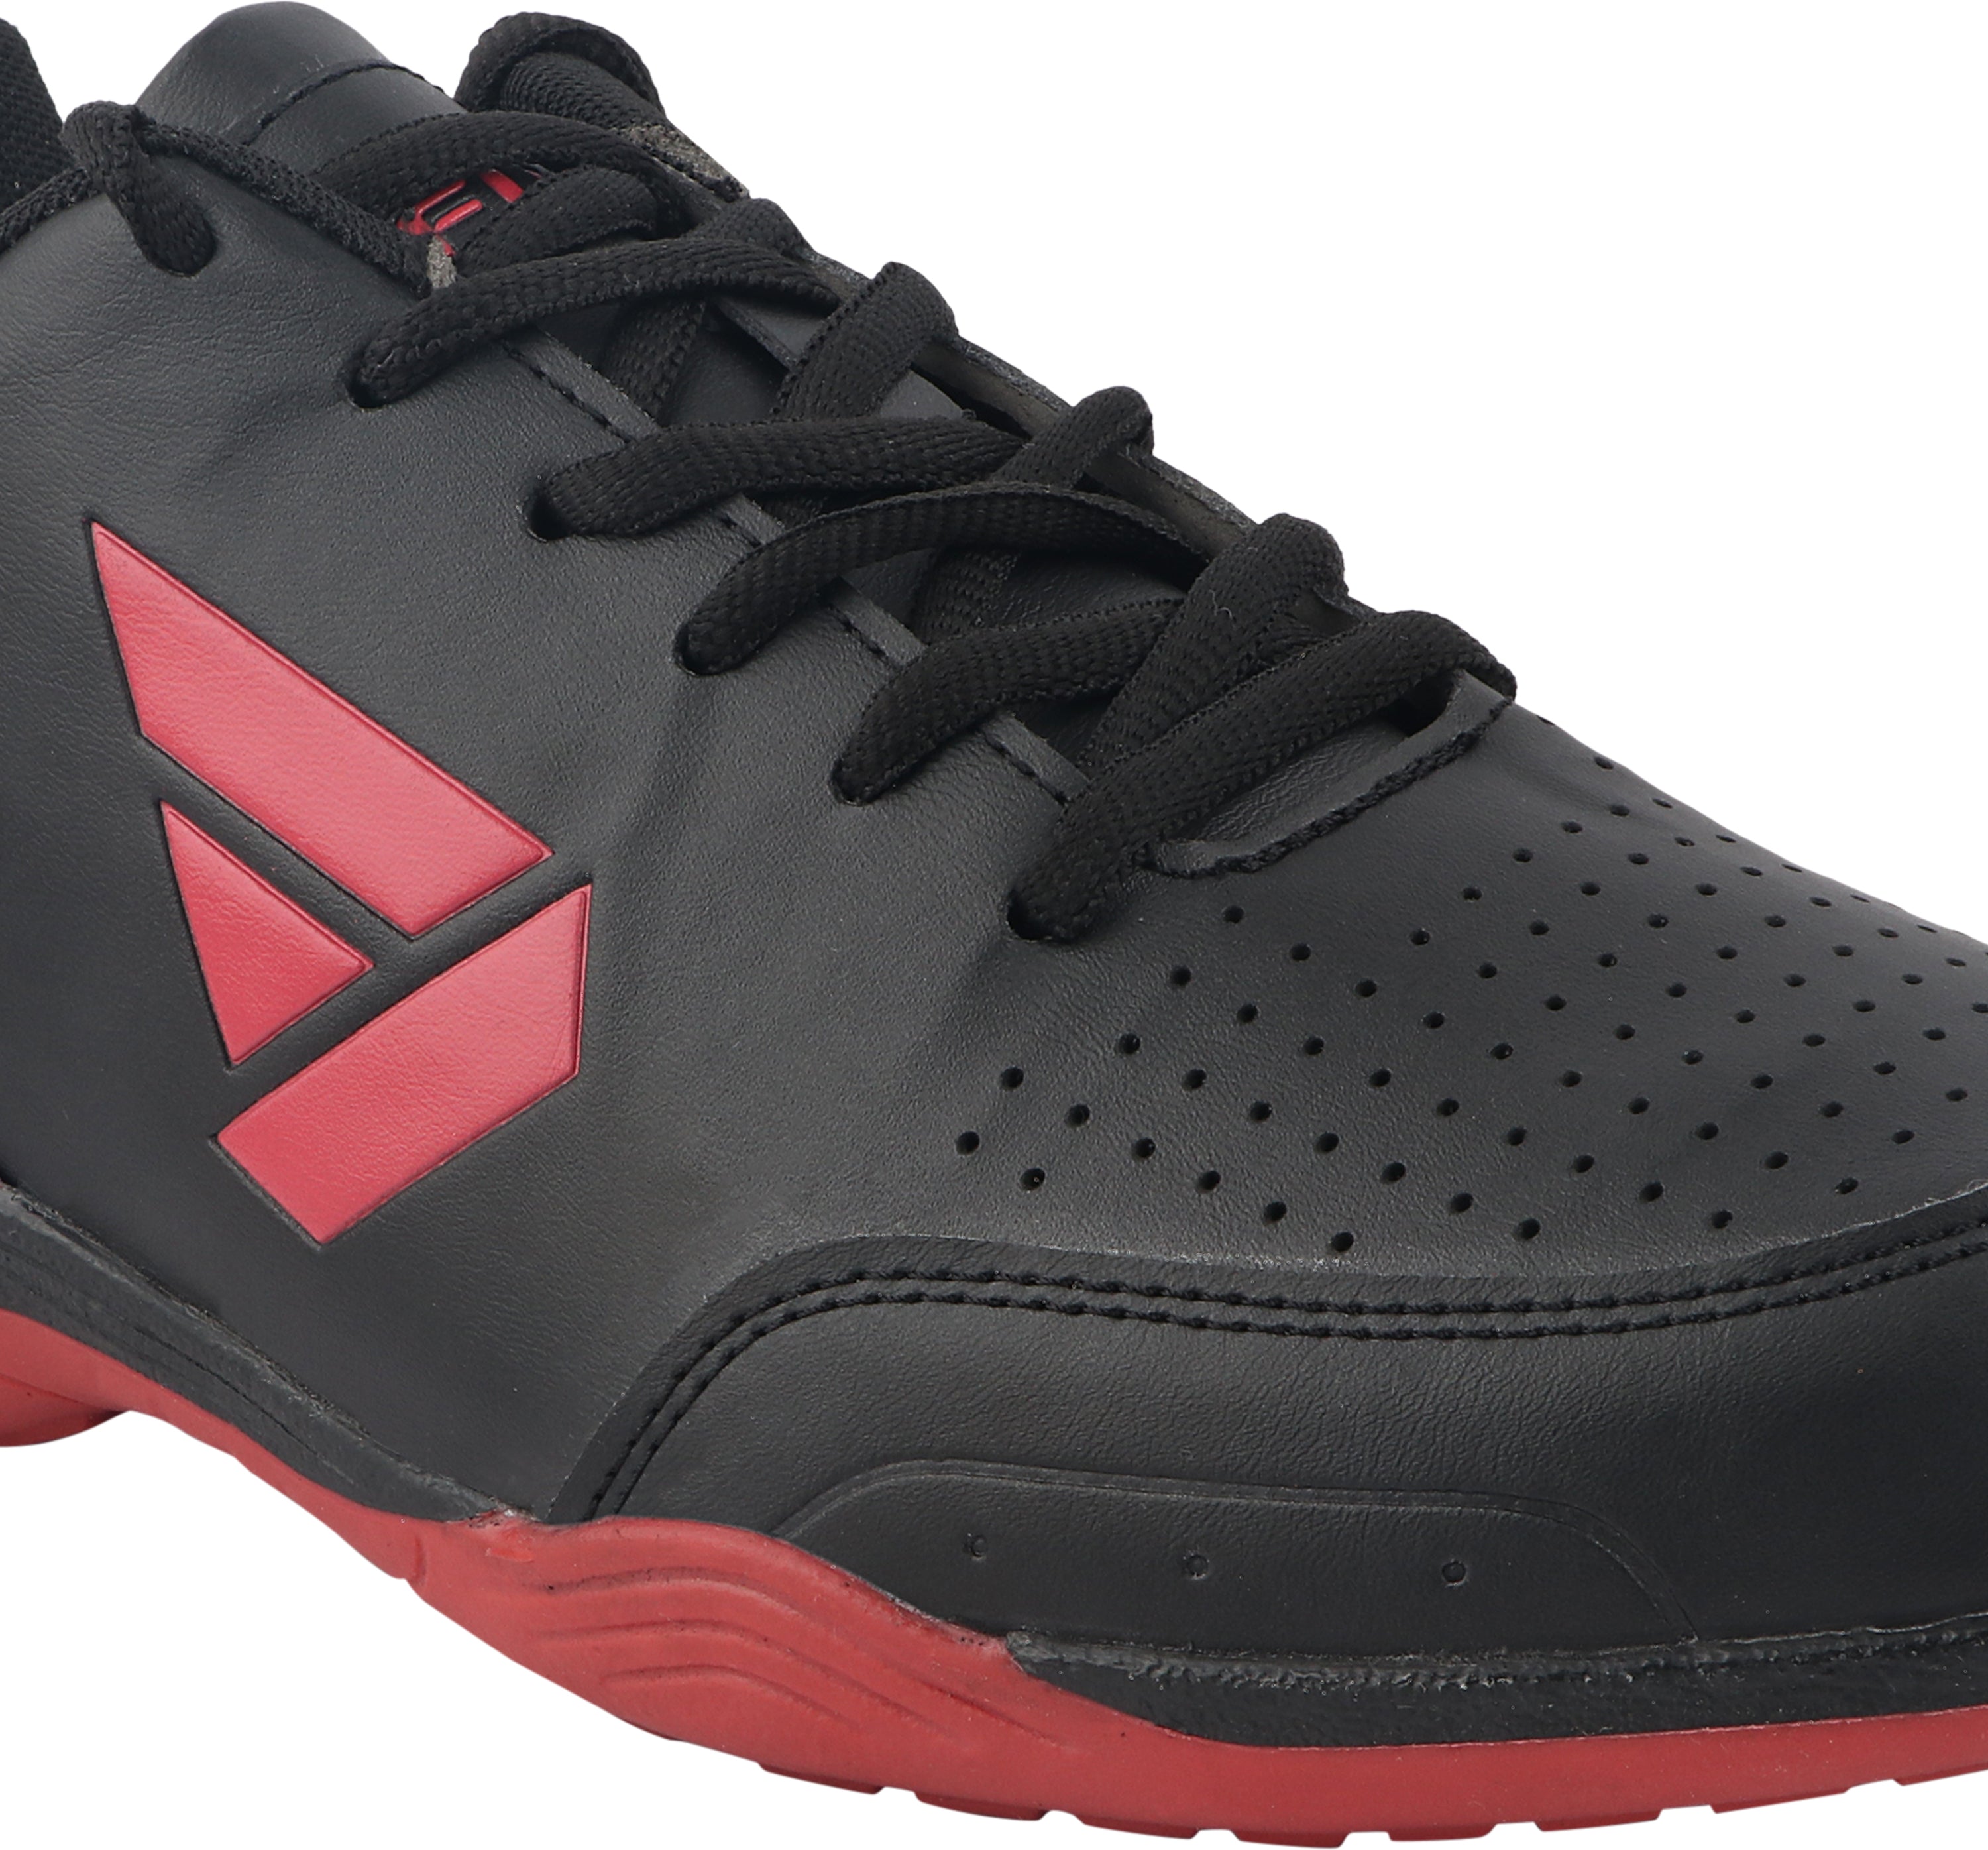 Fuel Ultima Sports Shoes For Men (Black-Red)